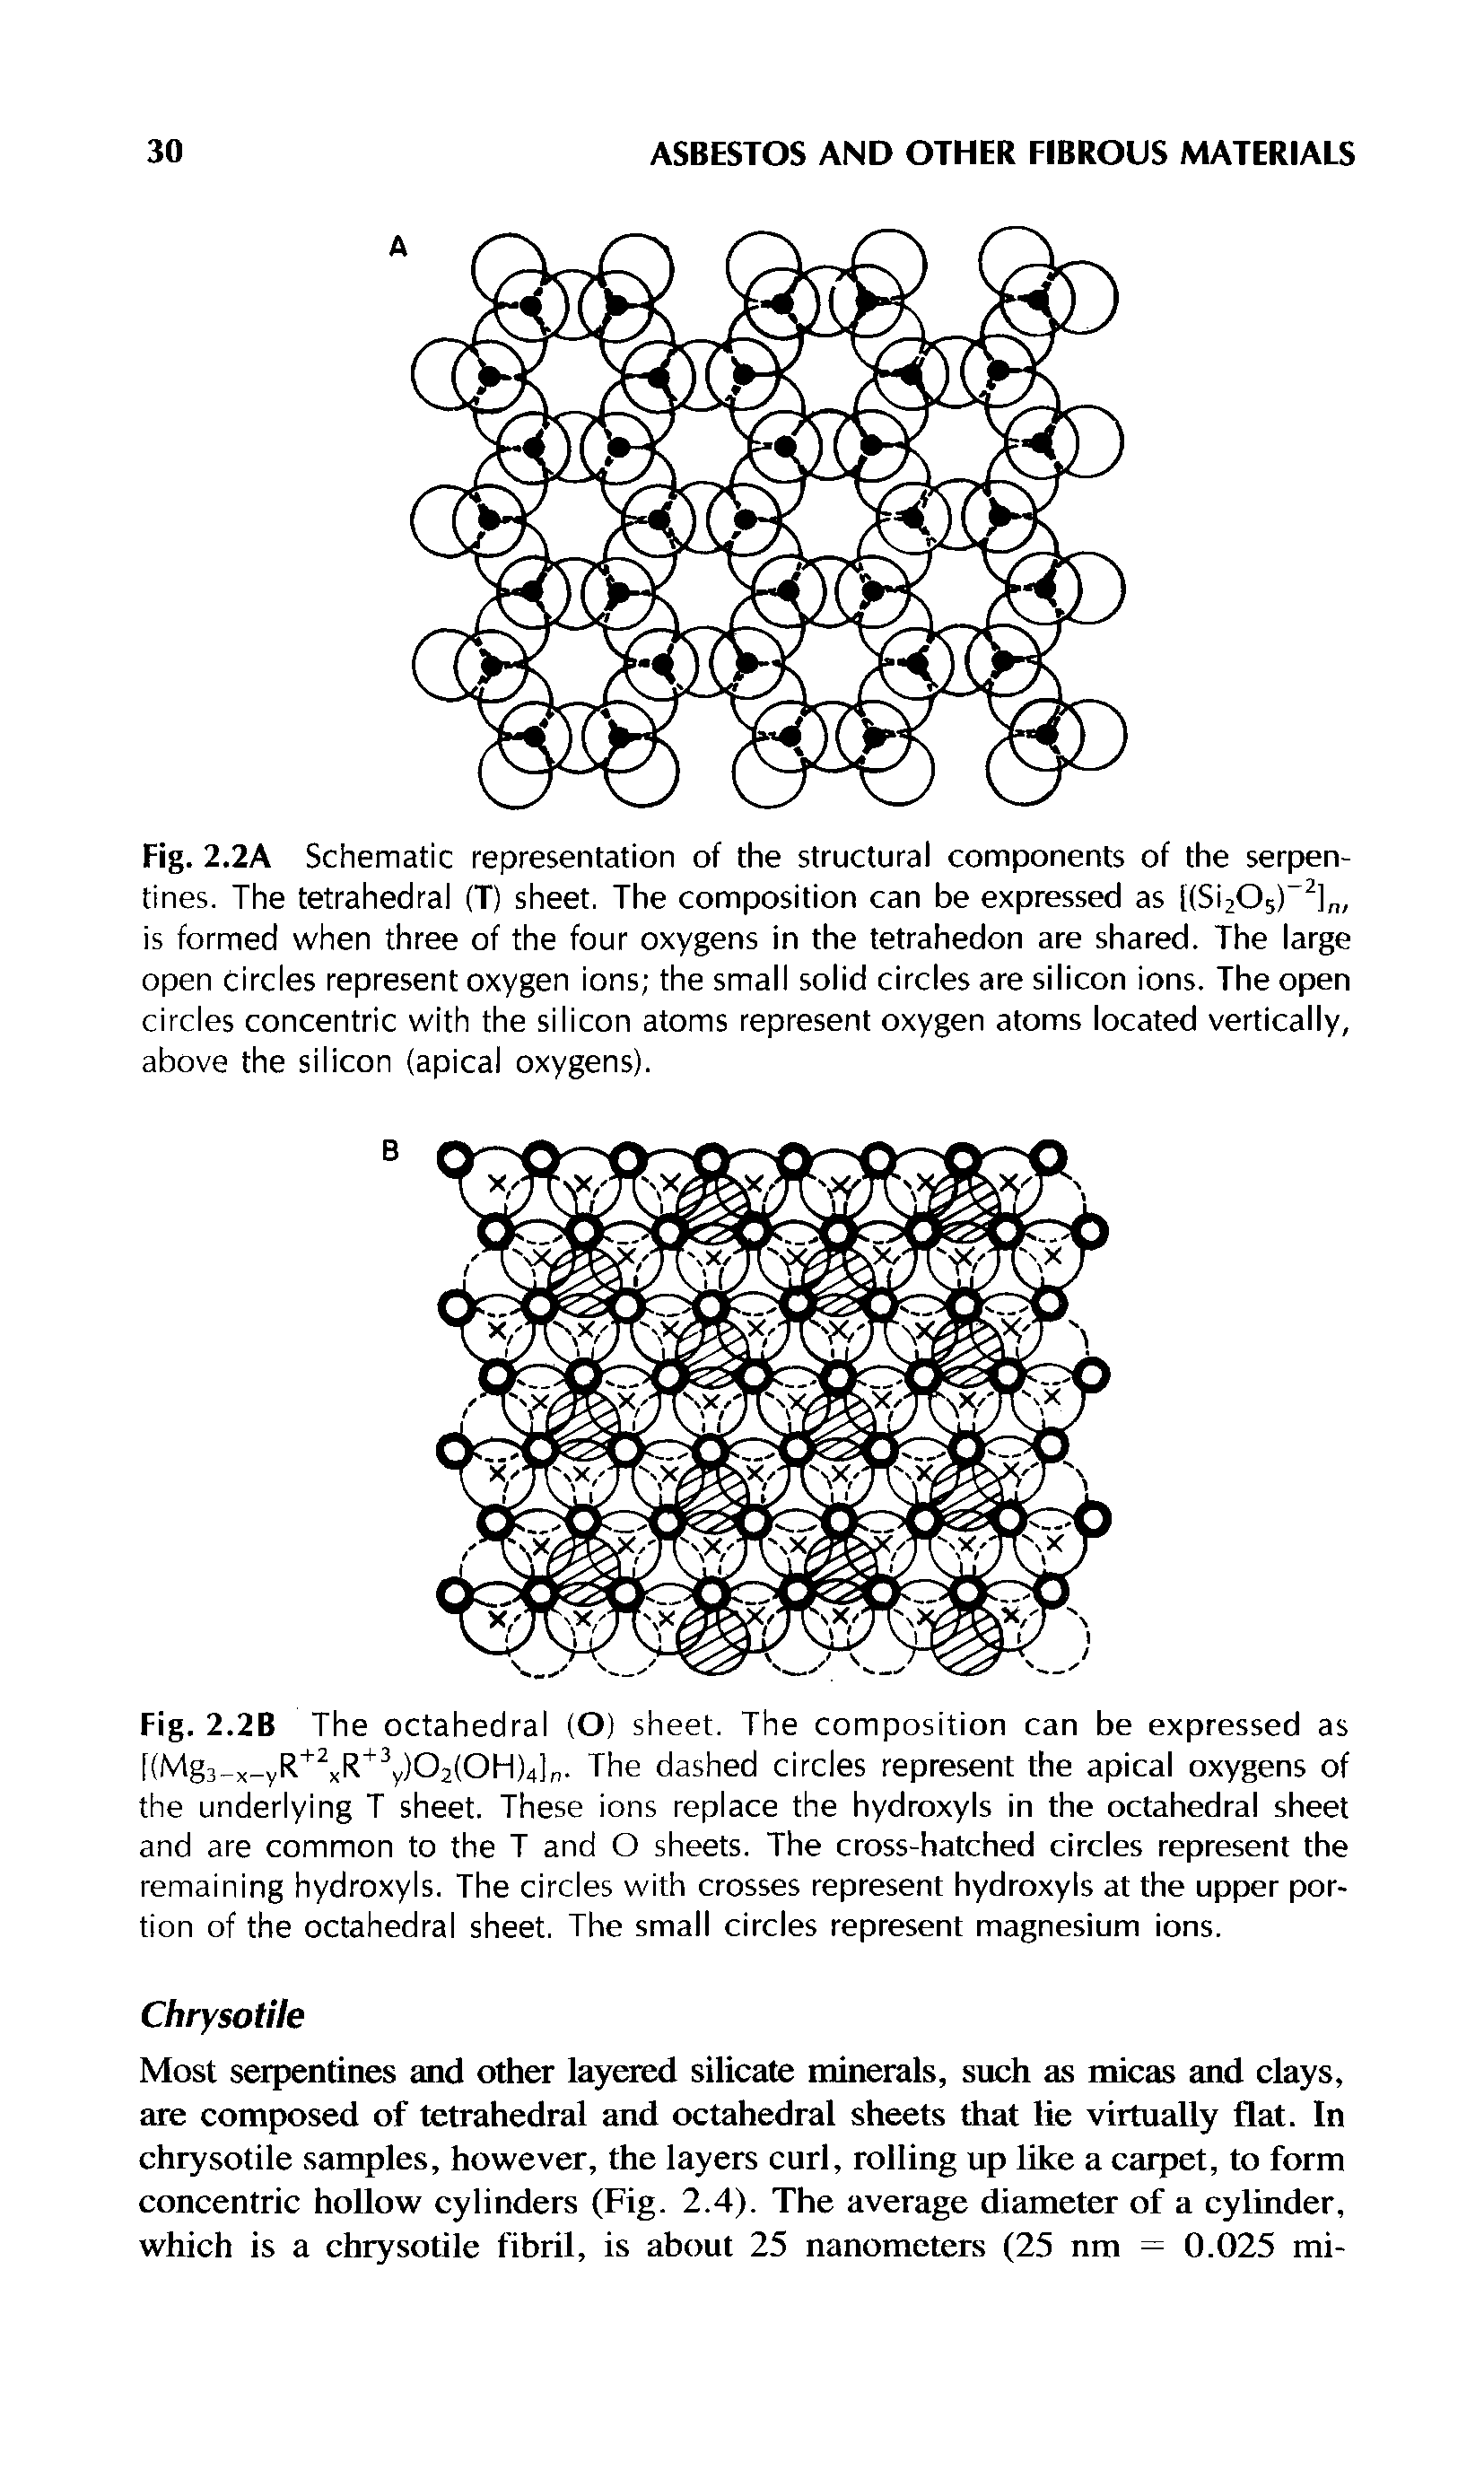 Fig. 2.2A Schematic representation of the structural components of the serpentines. The tetrahedral (T) sheet. The composition can be expressed as [(Si205) ] , is formed when three of the four oxygens in the tetrahedon are shared. The large open Circles represent oxygen ions the small solid circles are silicon ions. The open circles concentric with the silicon atoms represent oxygen atoms located vertically, above the silicon (apical oxygens).